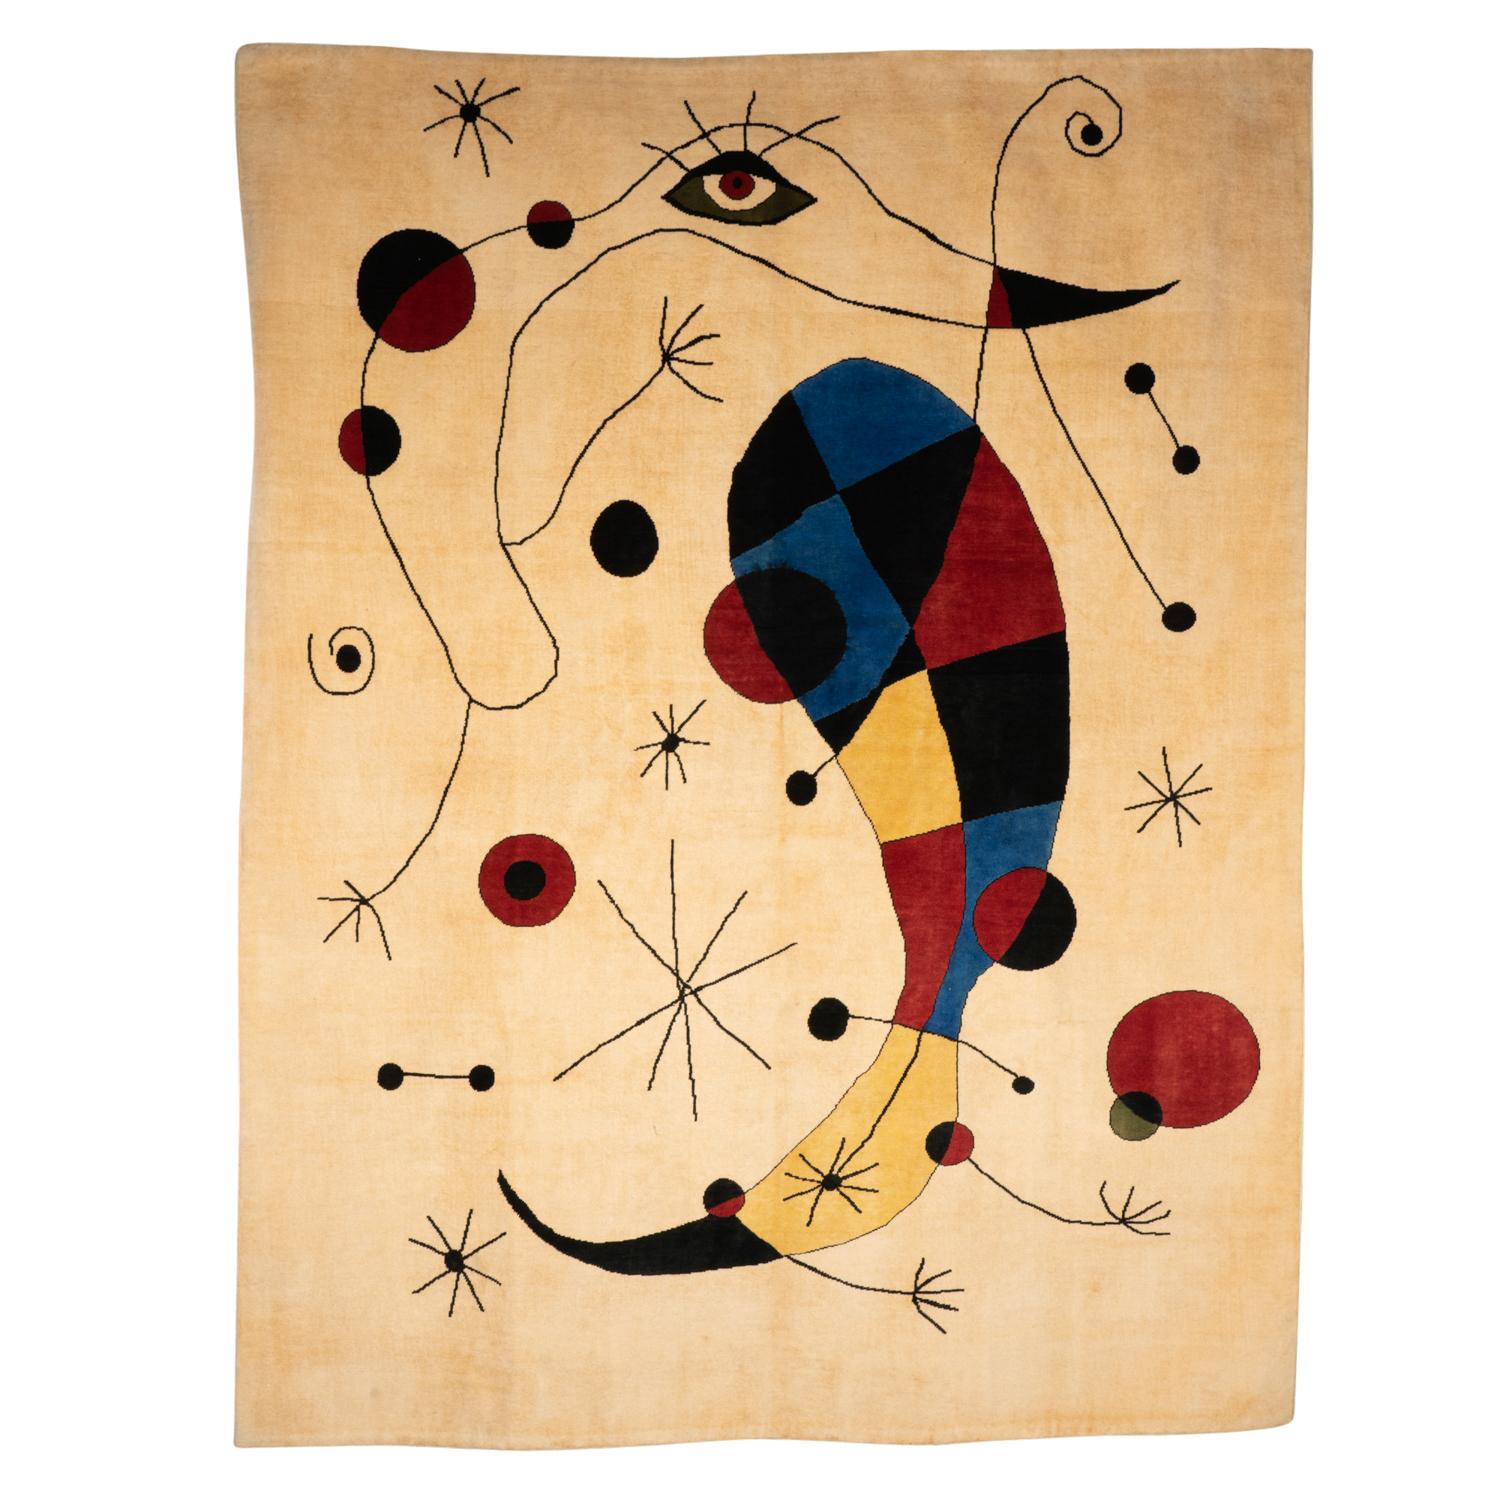 Rug, or tapestry, inspired by Joan Miro, in shades of red, yellow, blue and black on a beige background. Hand-knotted and in Merino wool.

Contemporary work of craftsmen.

Numbered 2/8. Area: 5 M2. Density: 700000 knots

Comes with a certificate